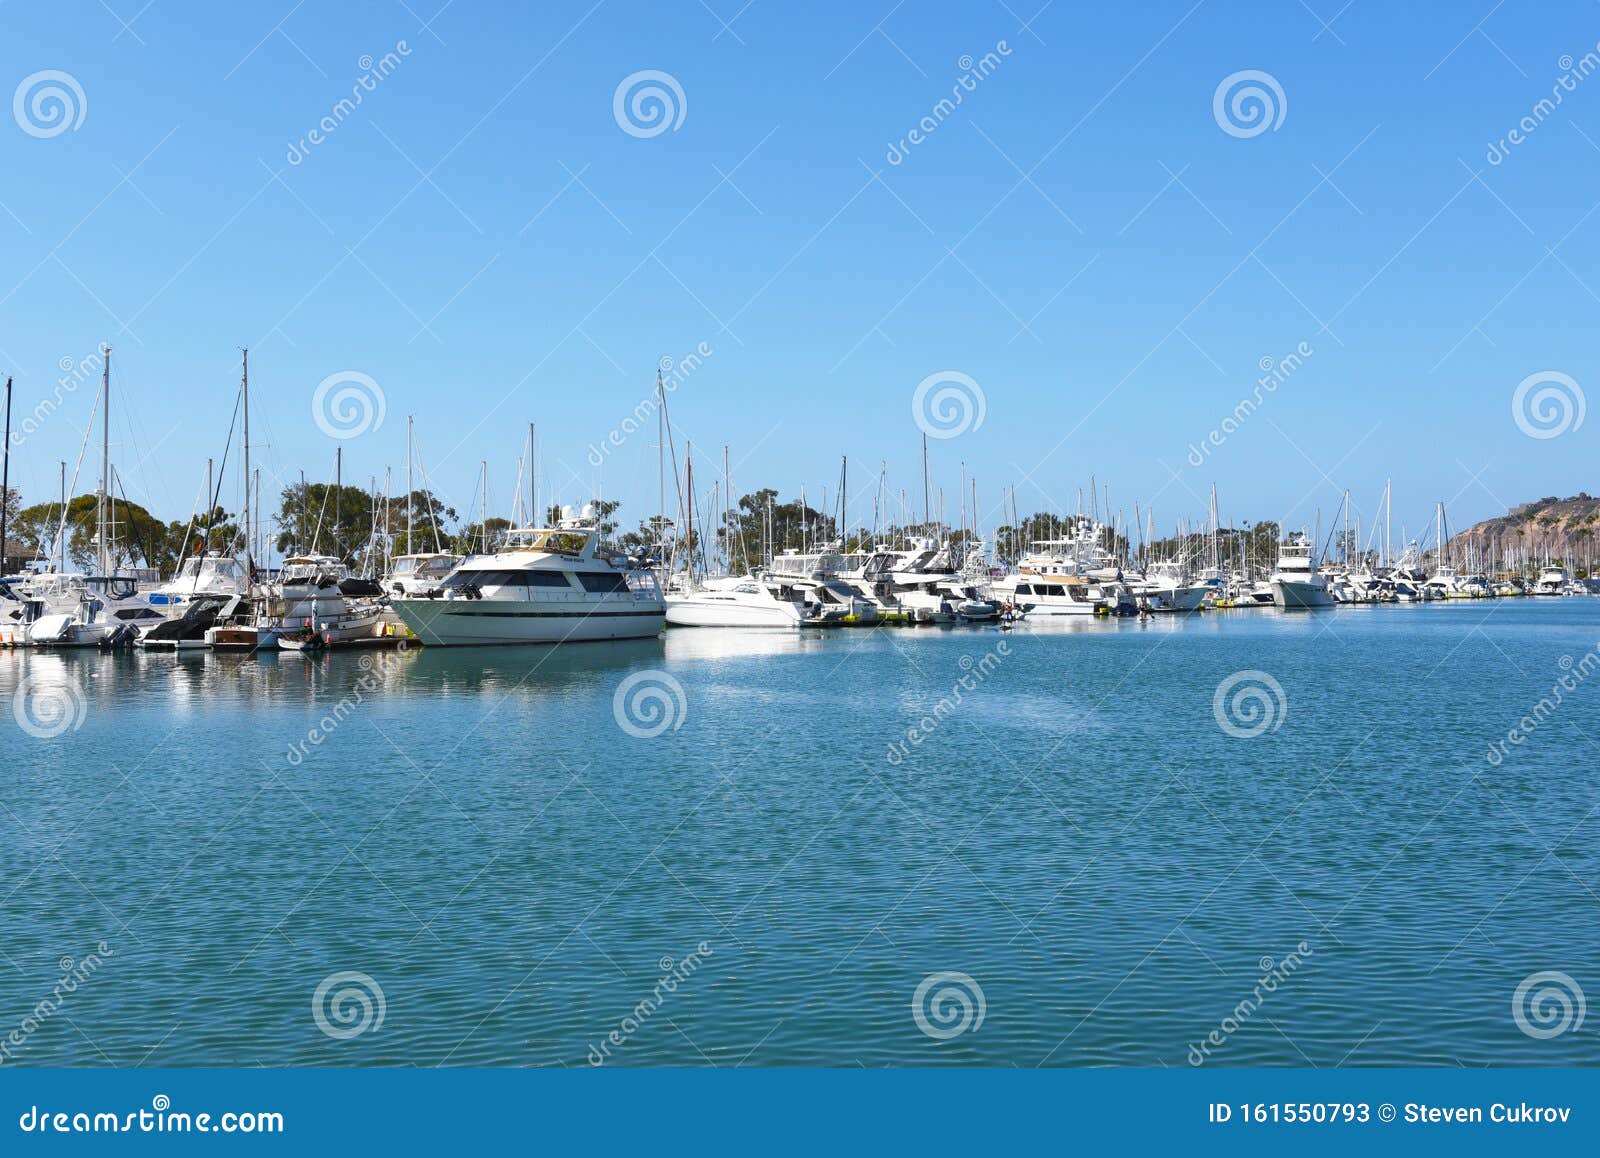 Channel with Boats Docked in Their Slips in the Dana Point Marina ...